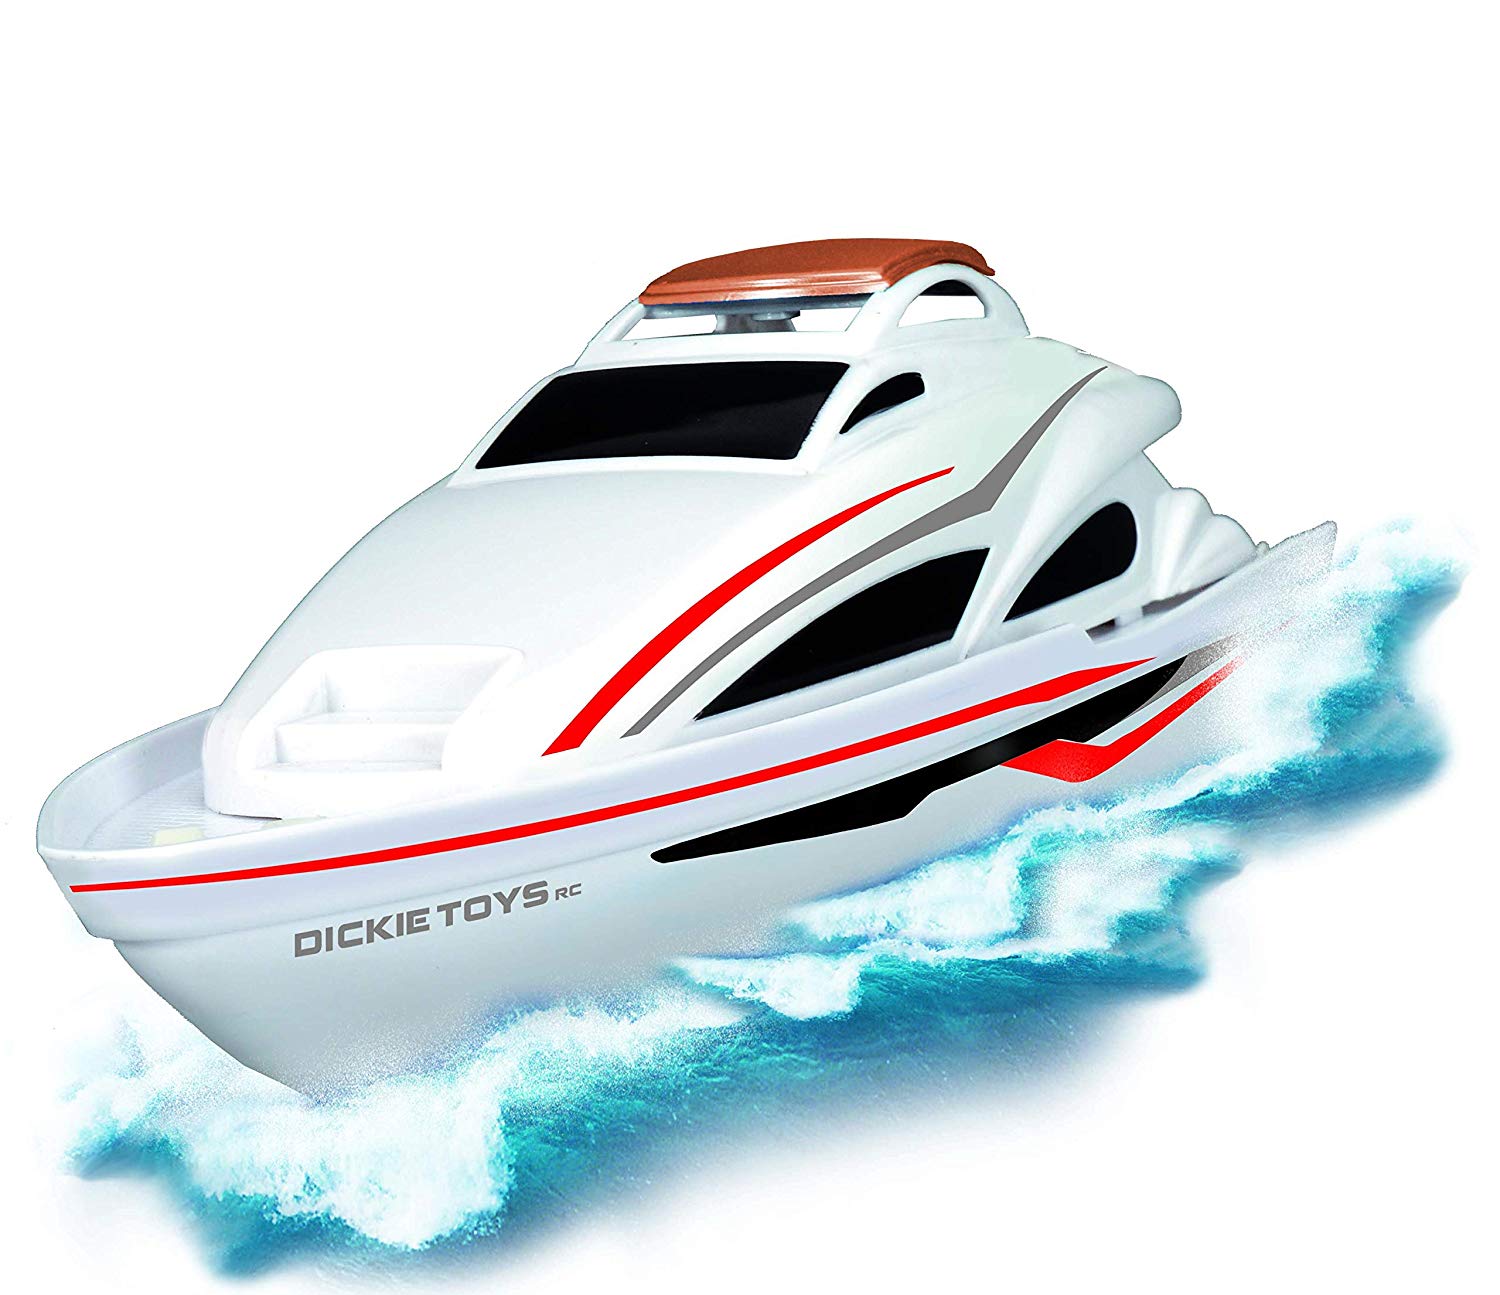 Dickie Toys 201119551 Sea Cruiser RC Speed Boat Ready to Run 2.4 GHz 34 cm 